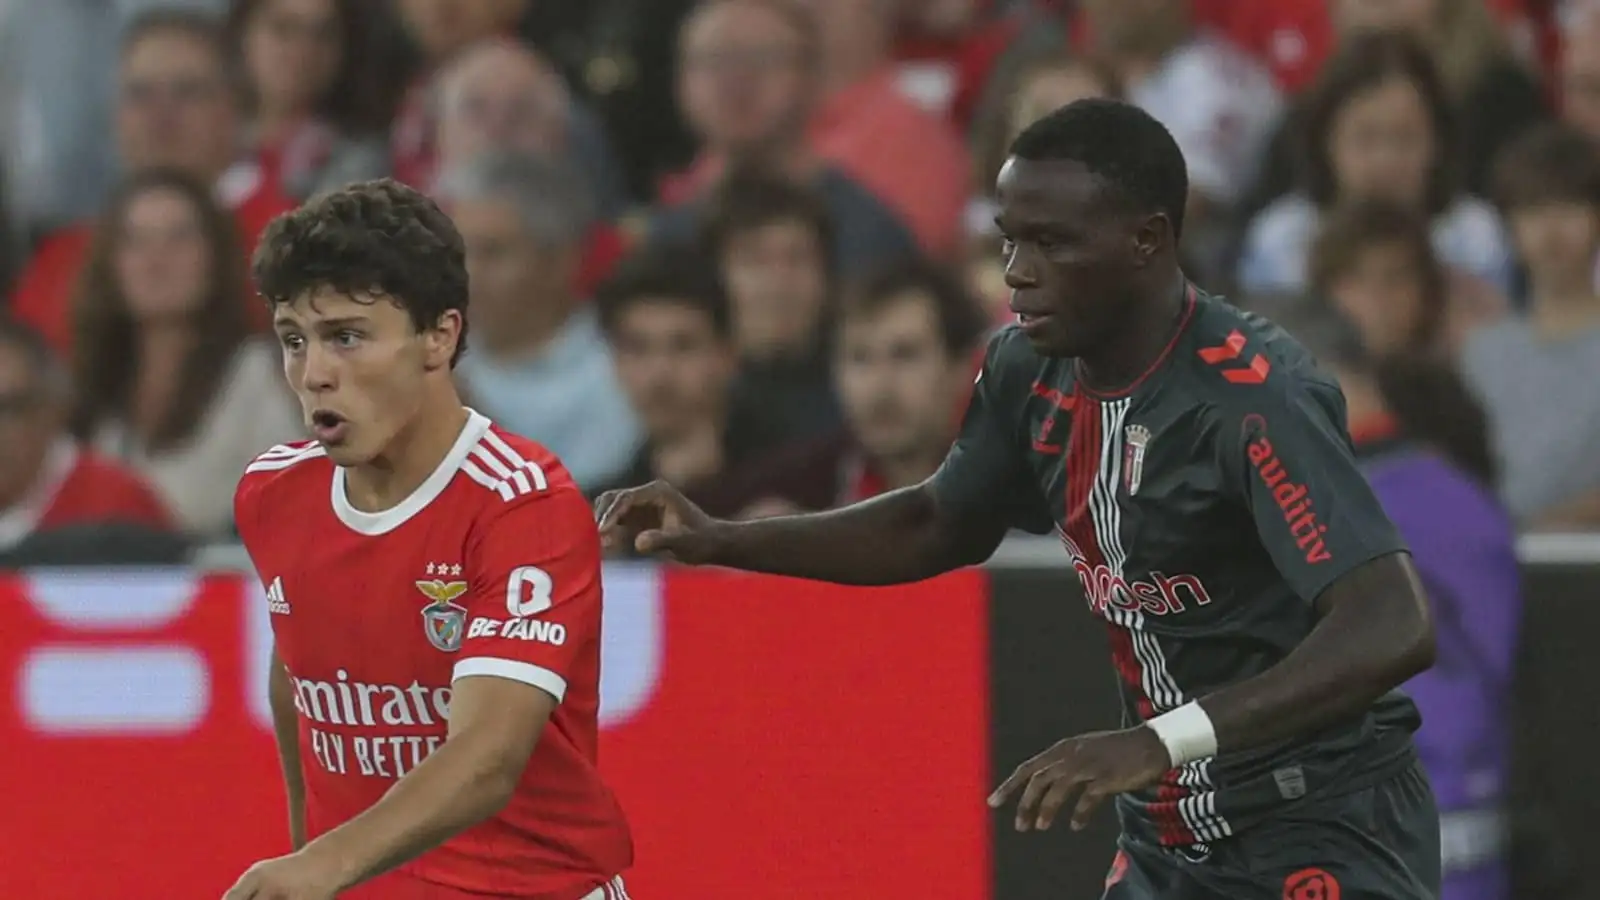 Joao Neves being chased by Braga player during Benfica match